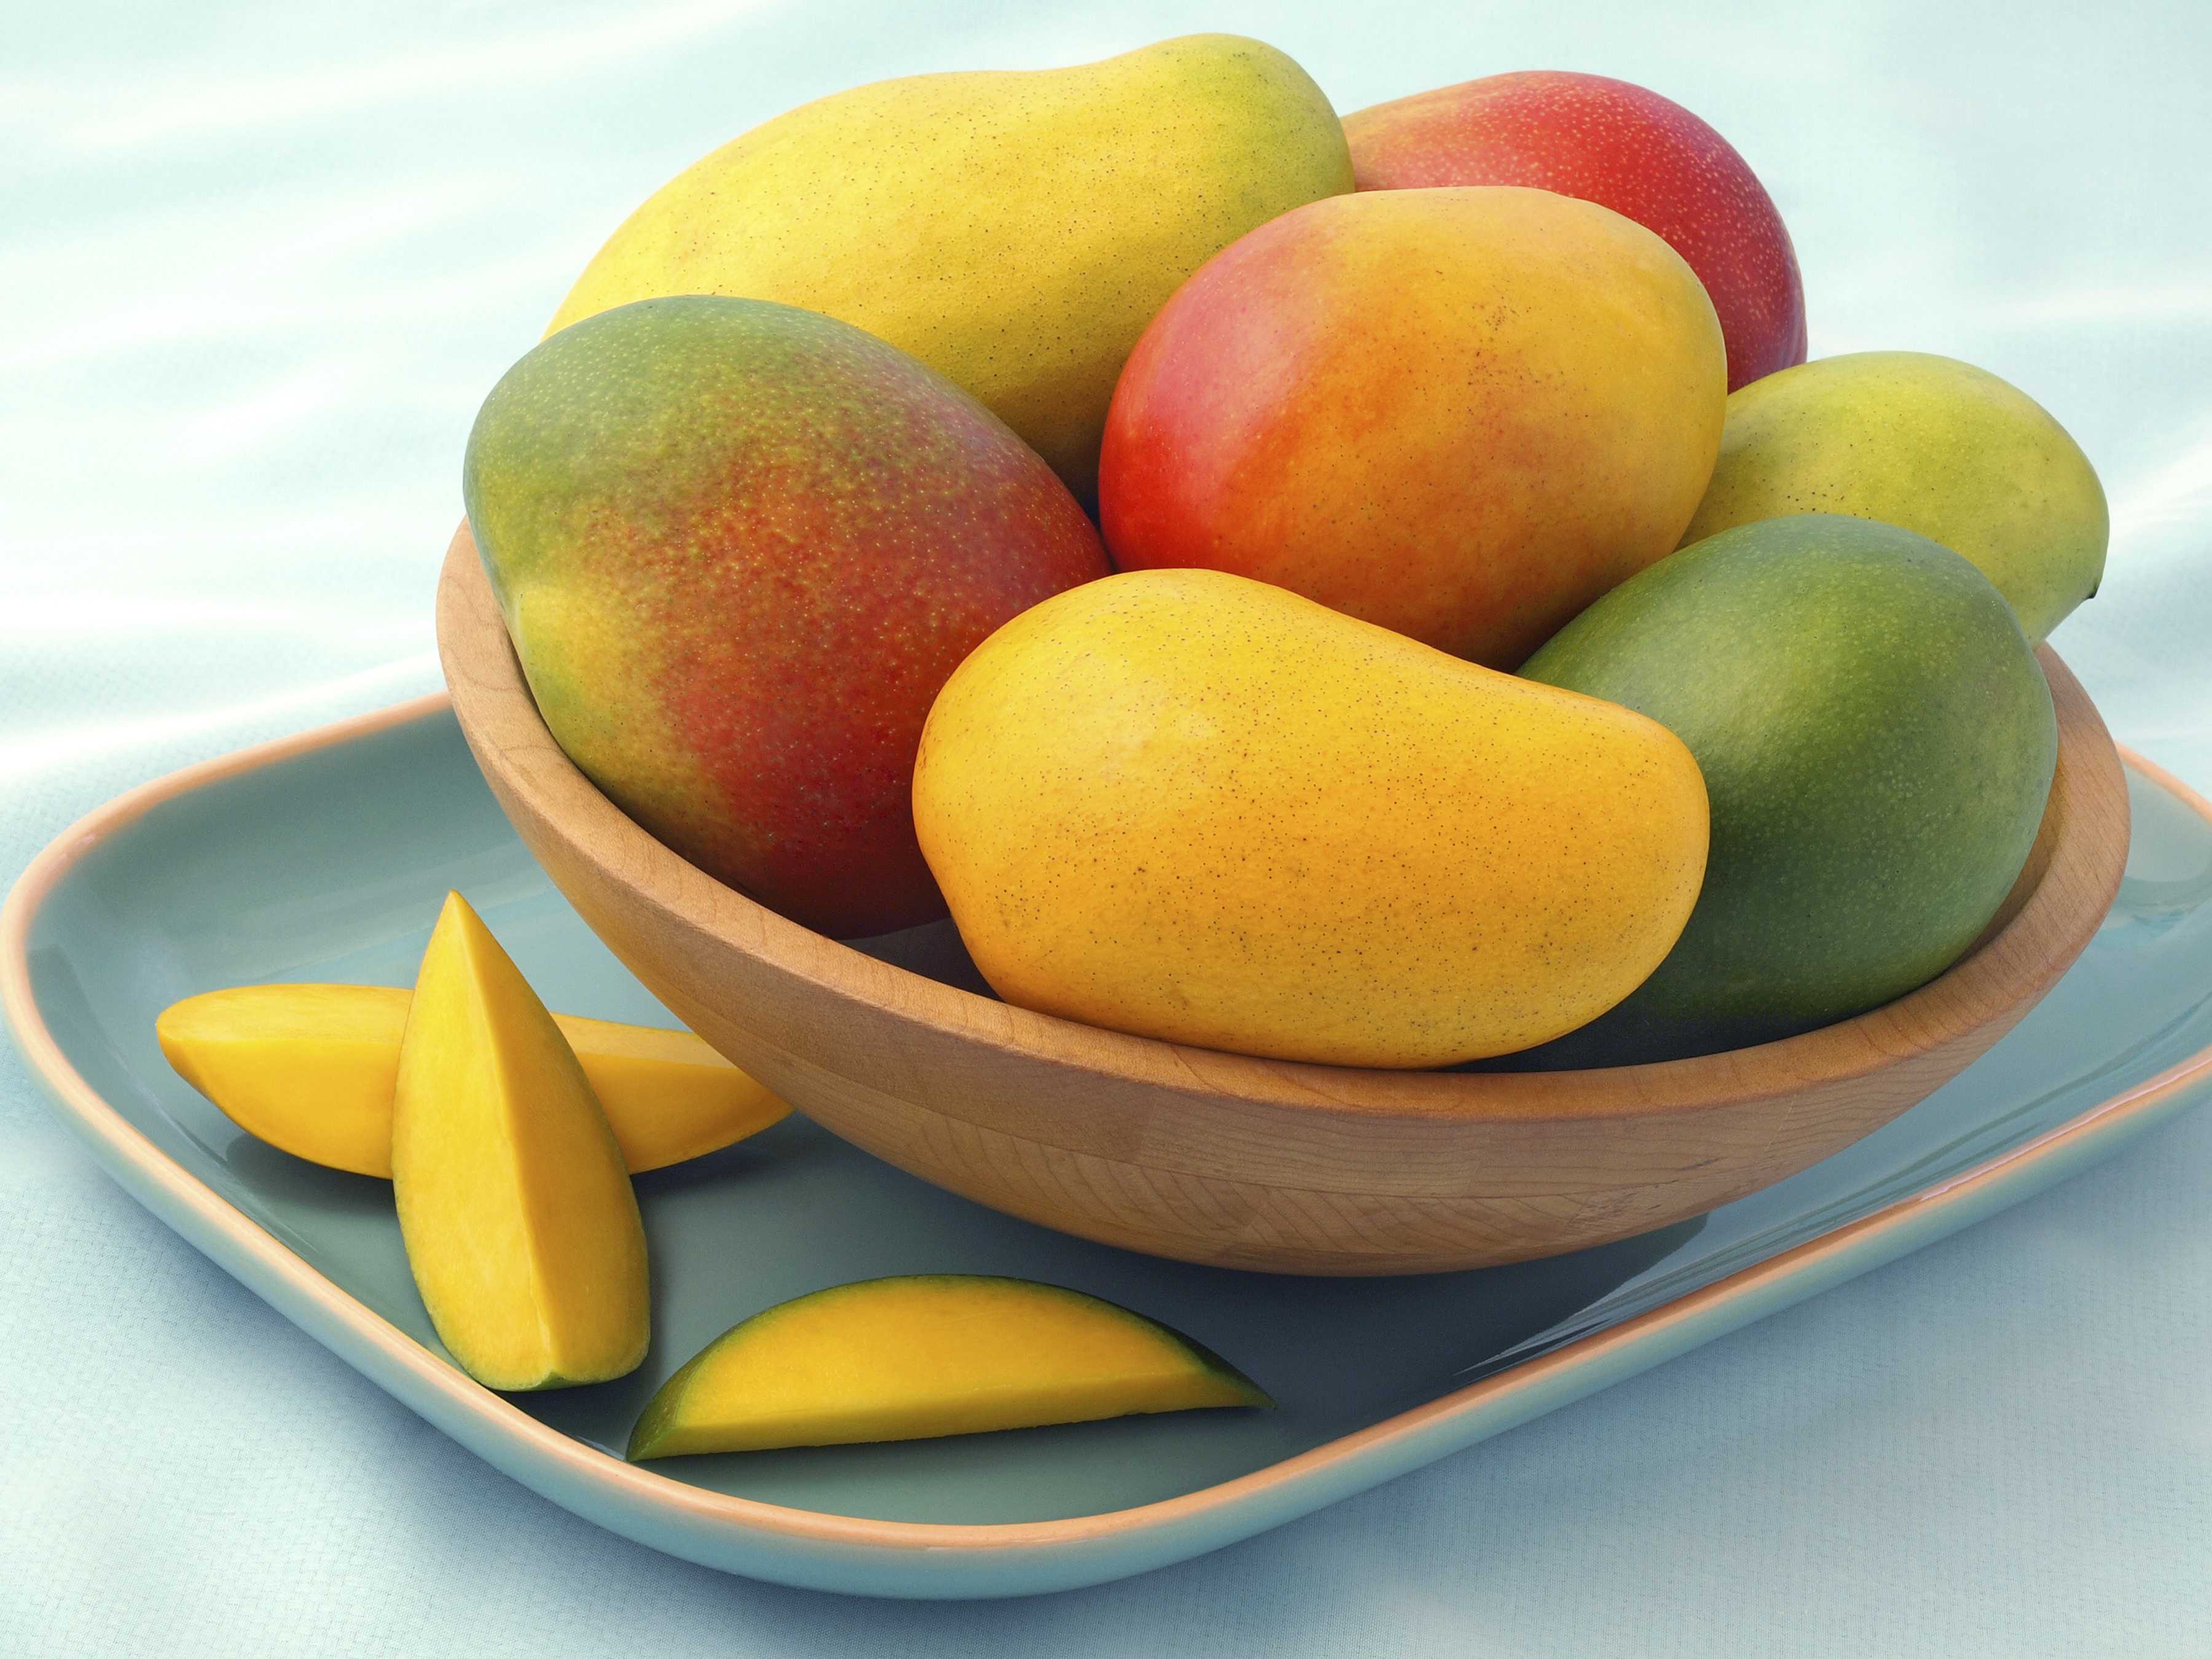 Craving for Mango? Here are Good News, with Free Recipes